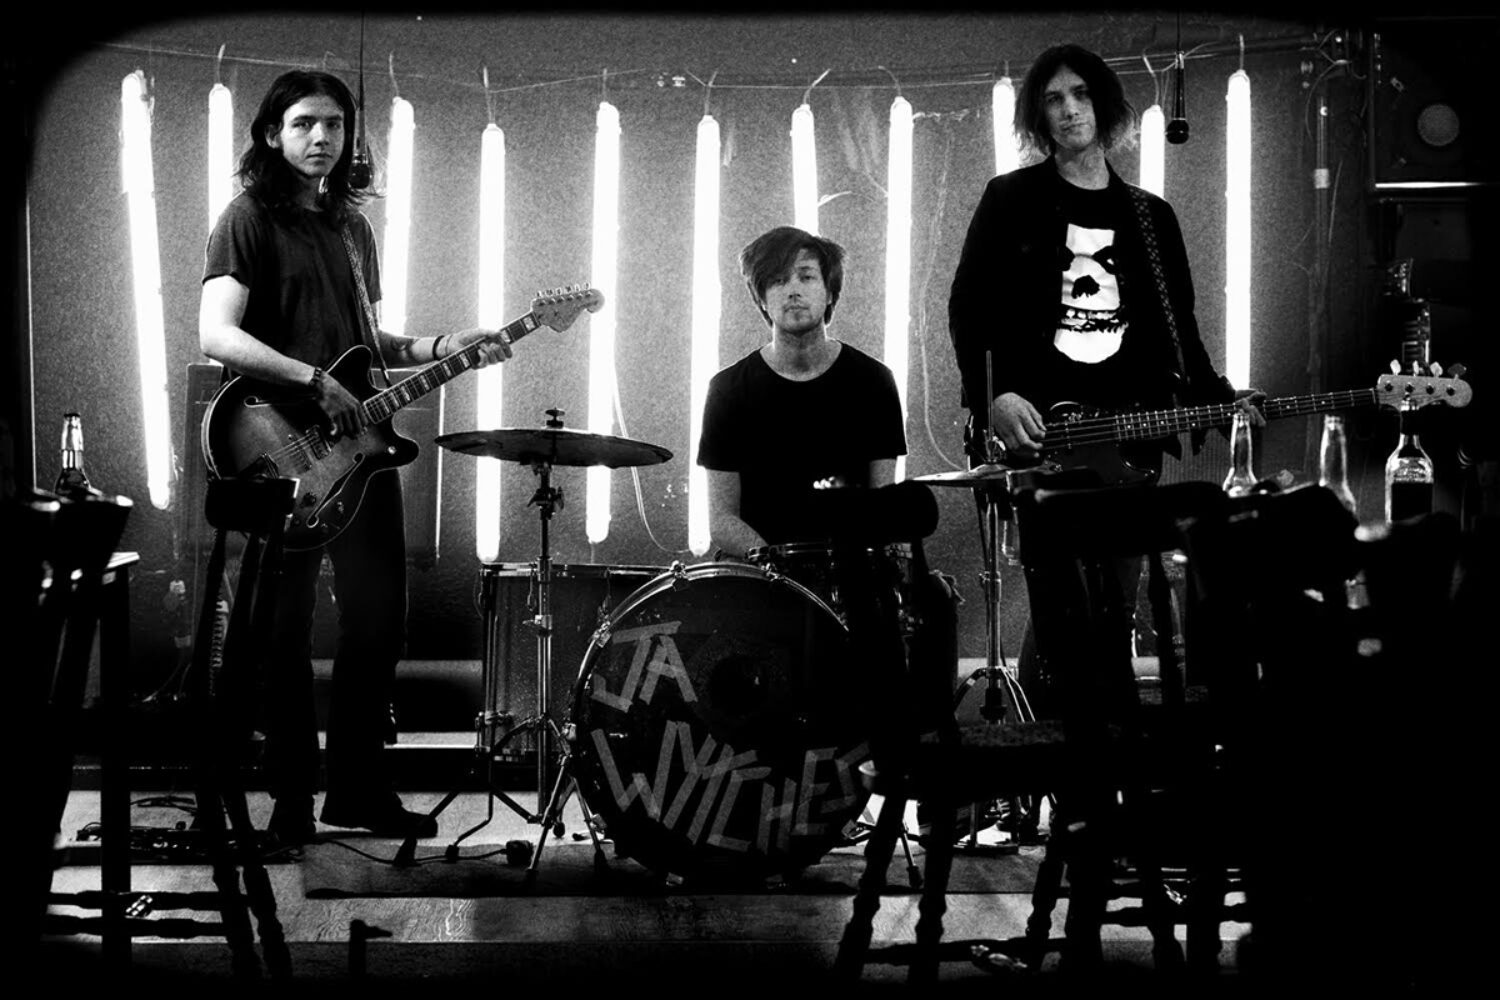 There's a new The Wytches album on the way